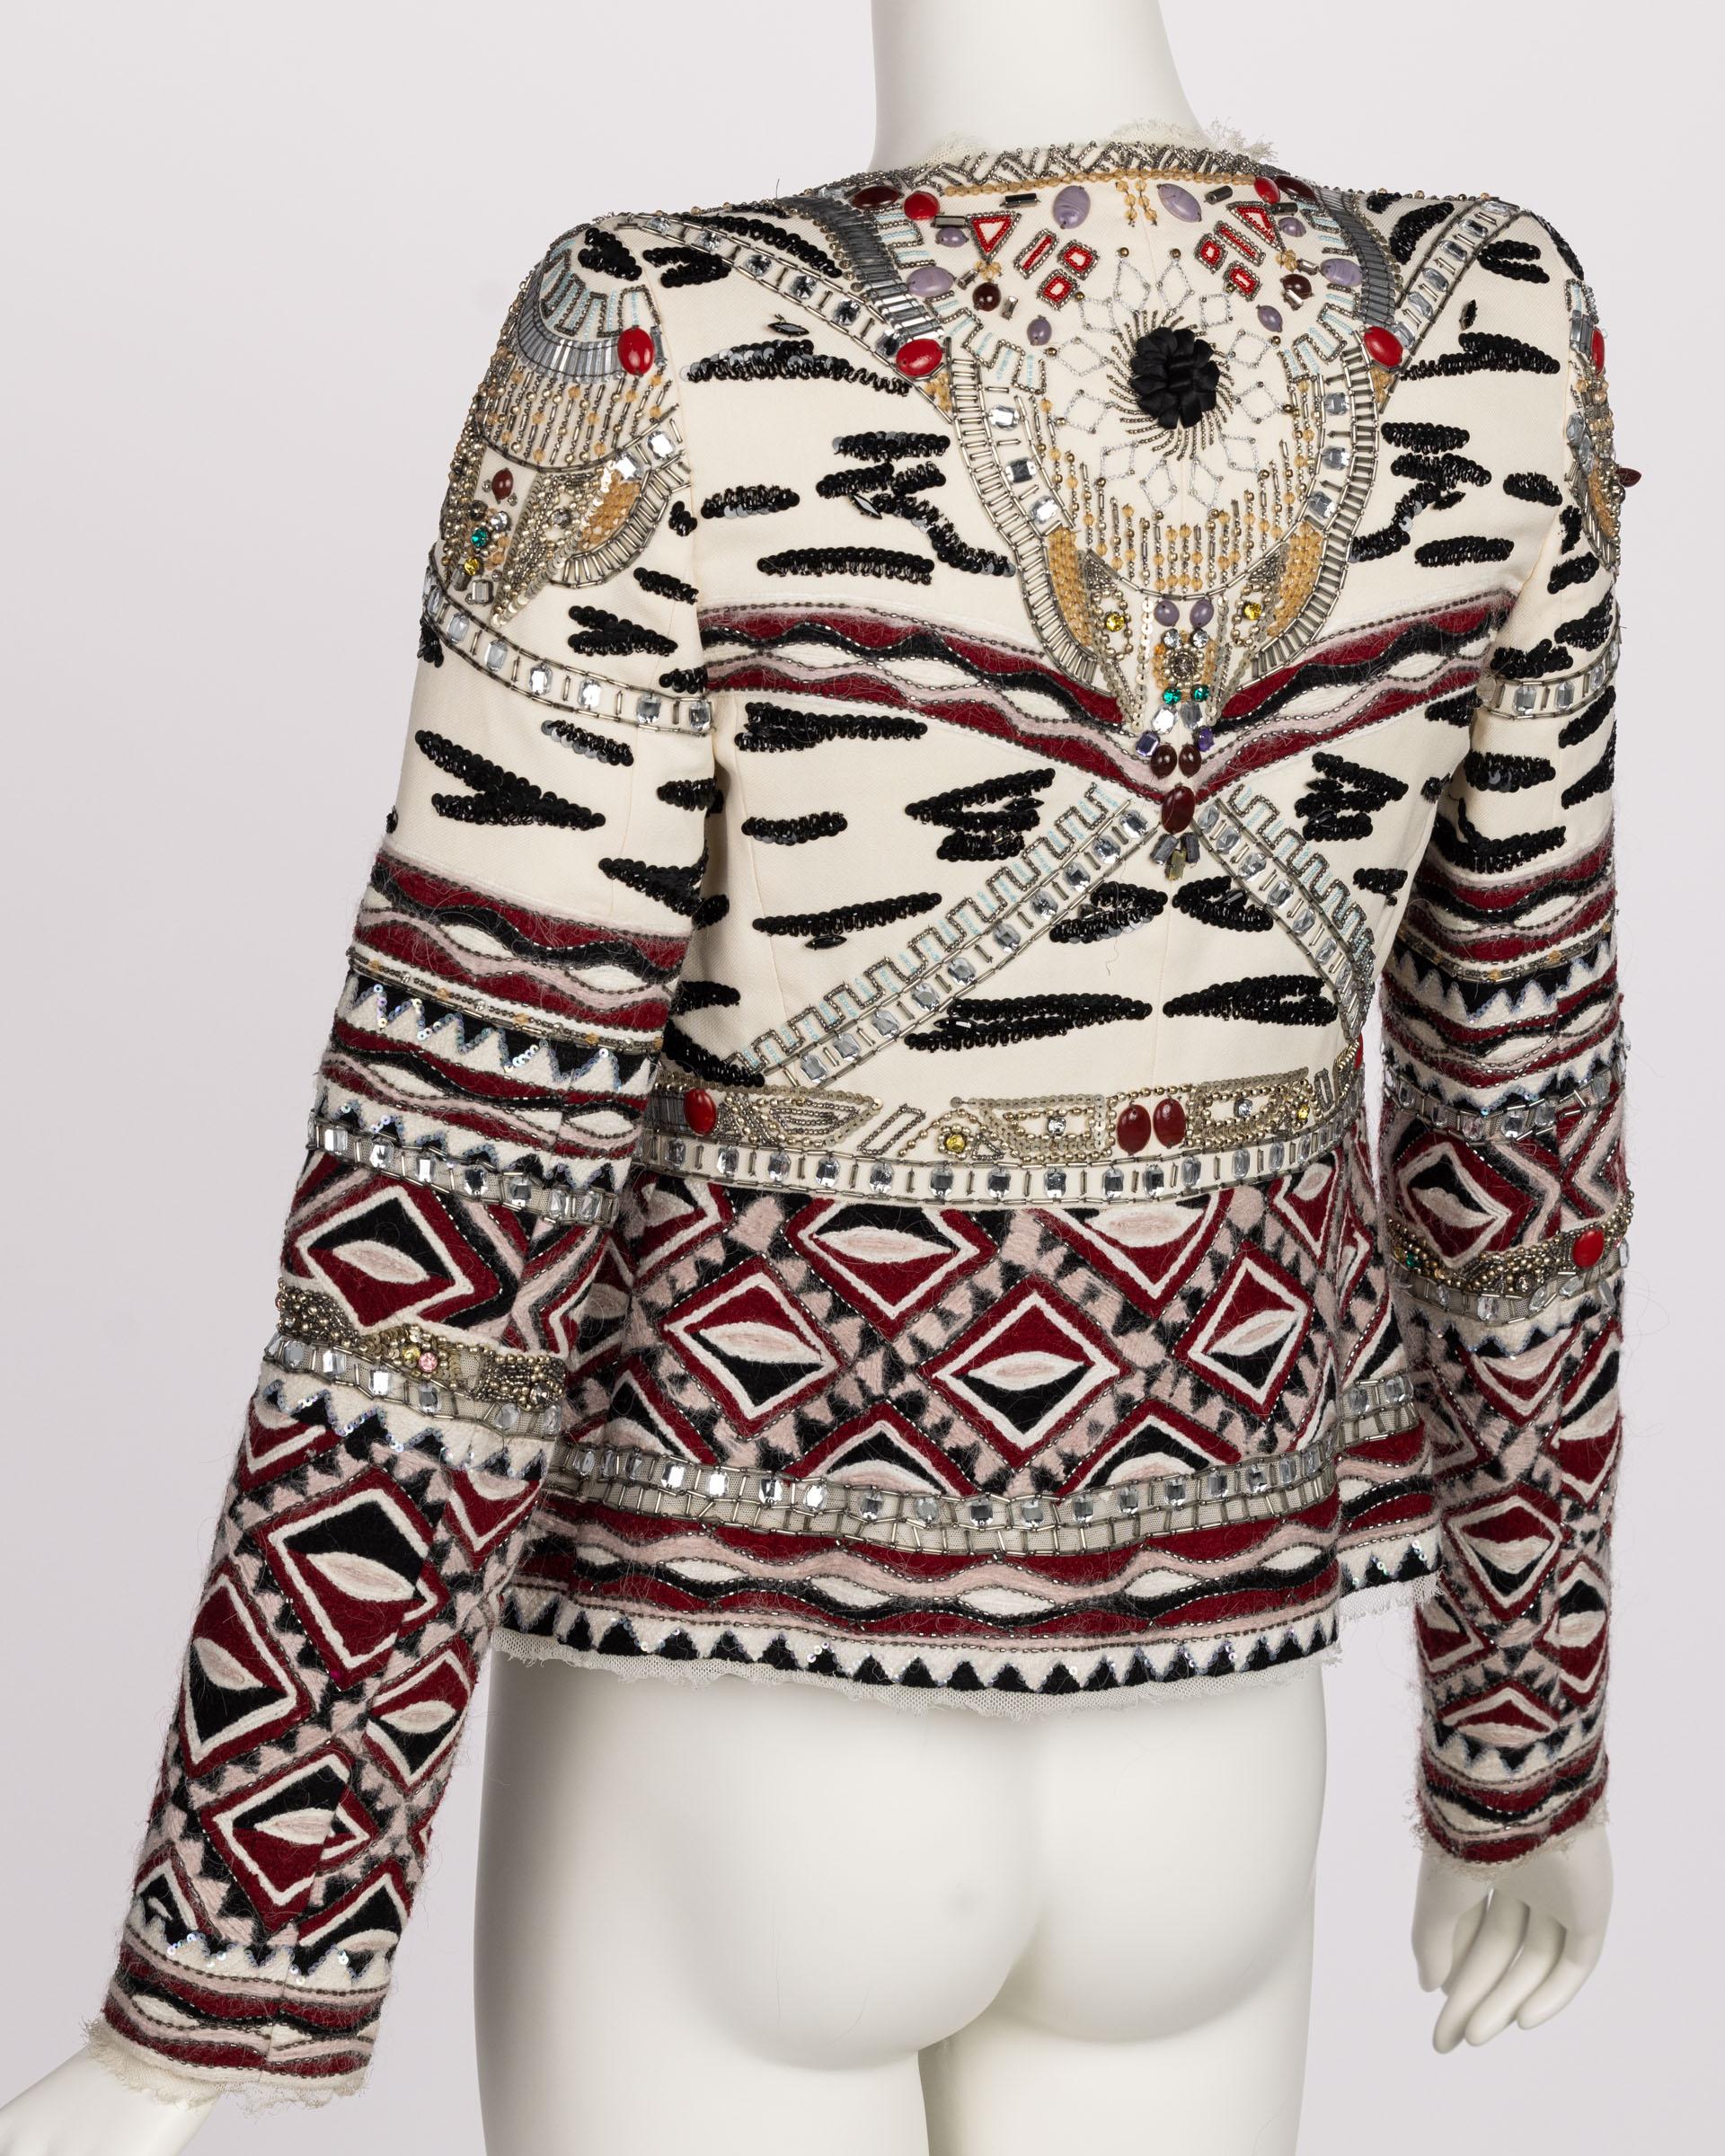 Women's or Men's  Emilio Pucci Embellished Wool Silk & Cotton Blend Jacket, Pre -Fall 2012 Runway